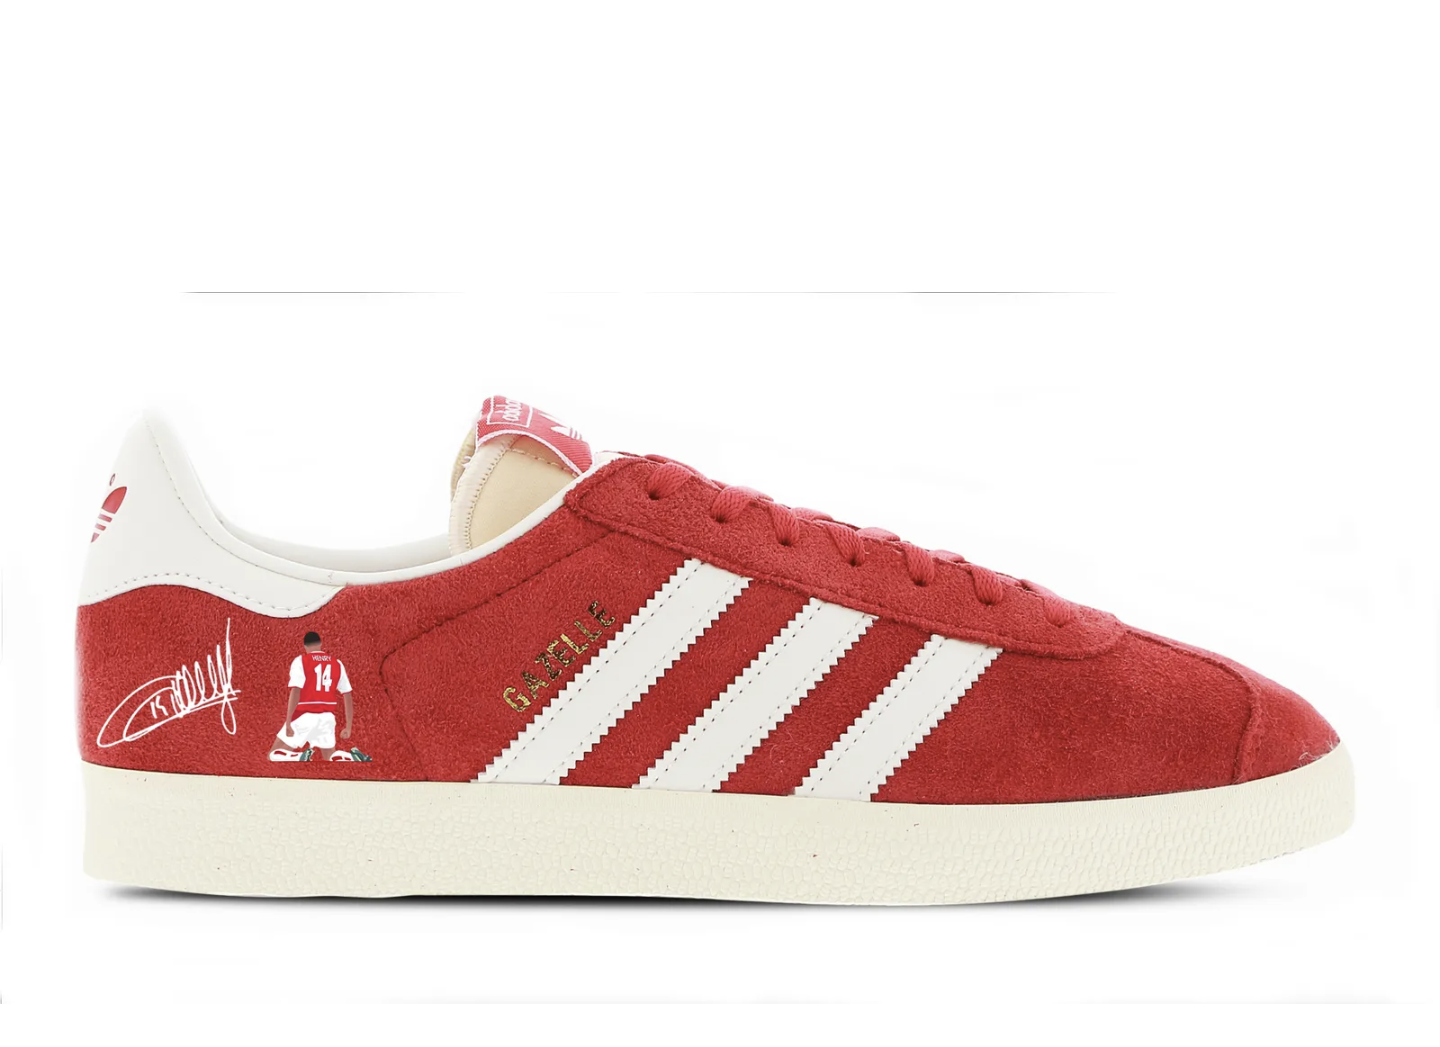 Limited edition Arsenal FC Thierry Henry Red / White Adidas custom Gazelle trainers / sneakers